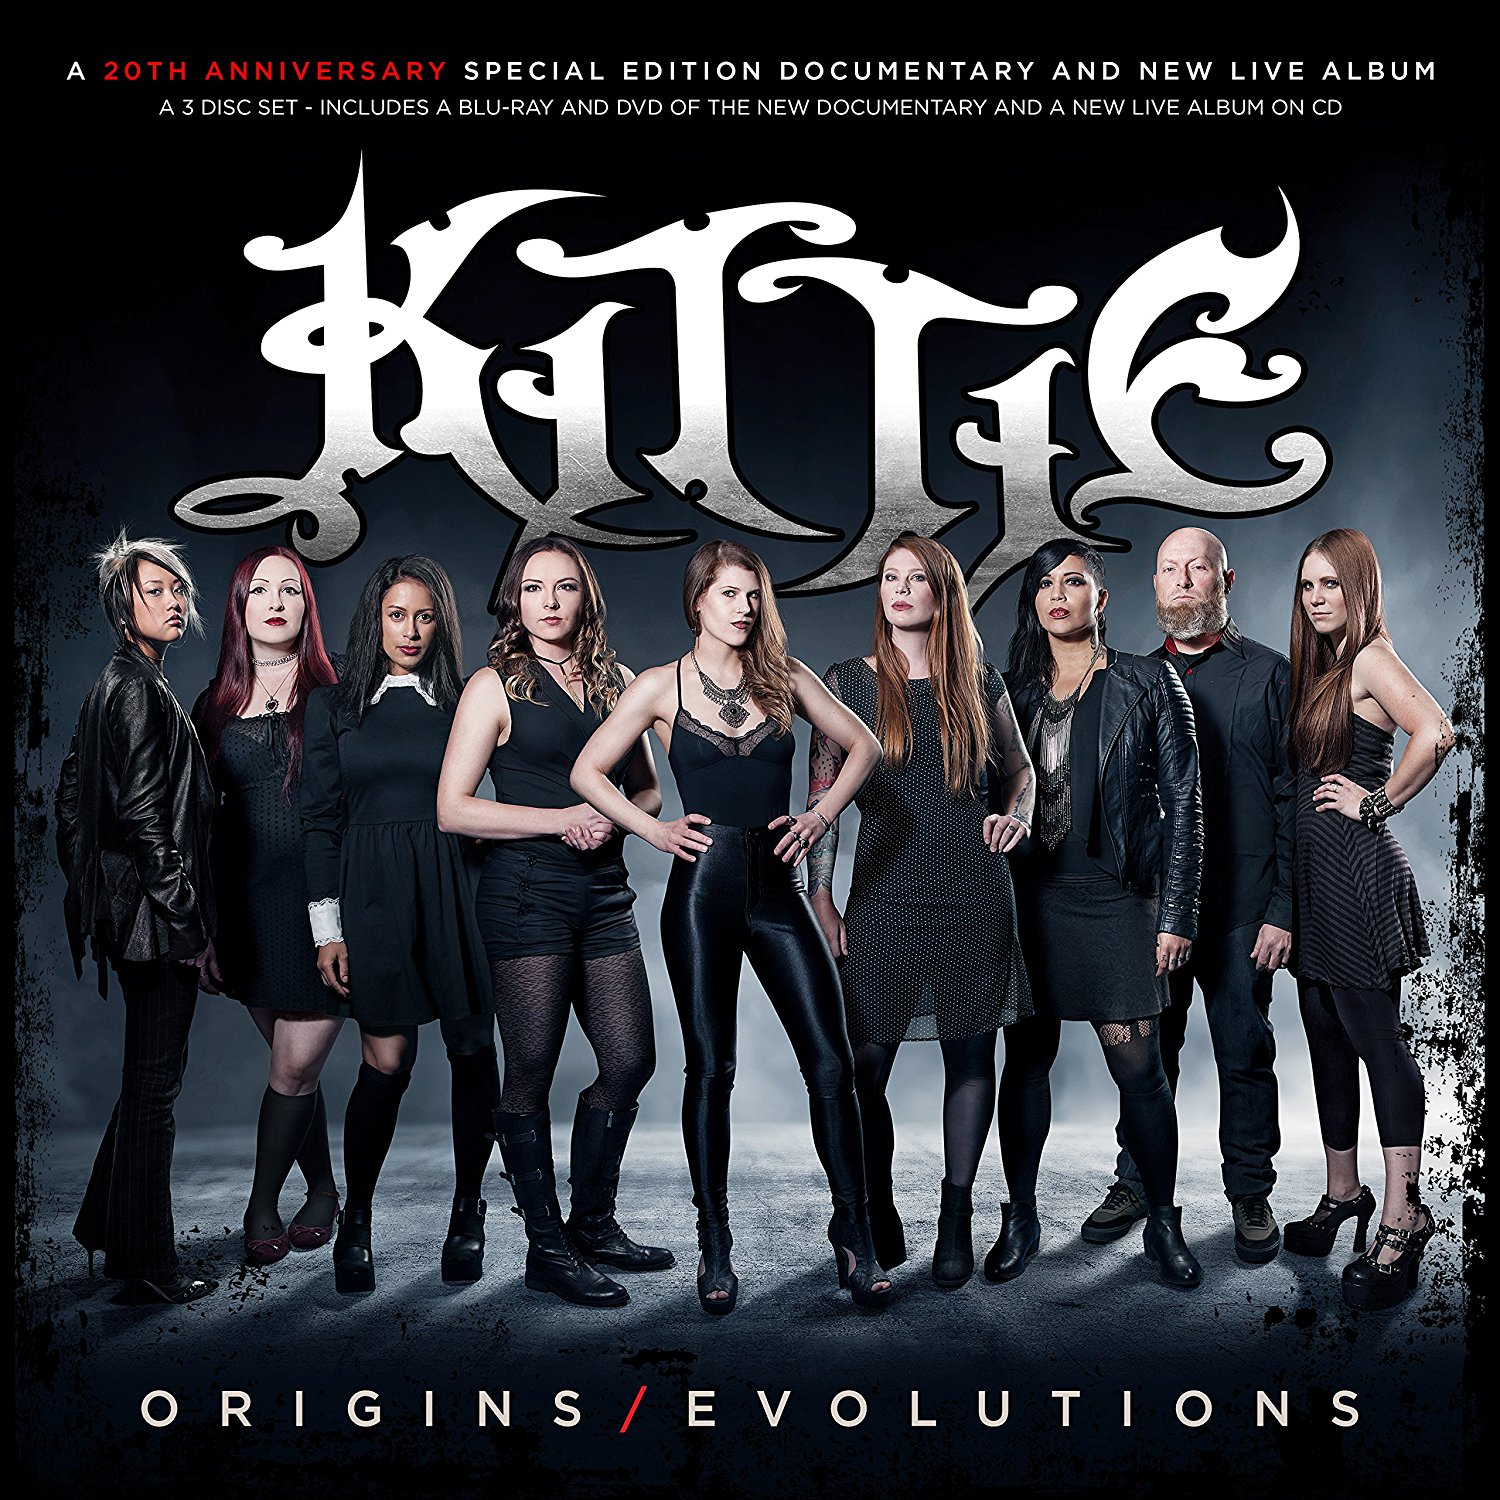 Kittie Origins/Evolutions – The Long-Awaited Look Into the History of the Band!